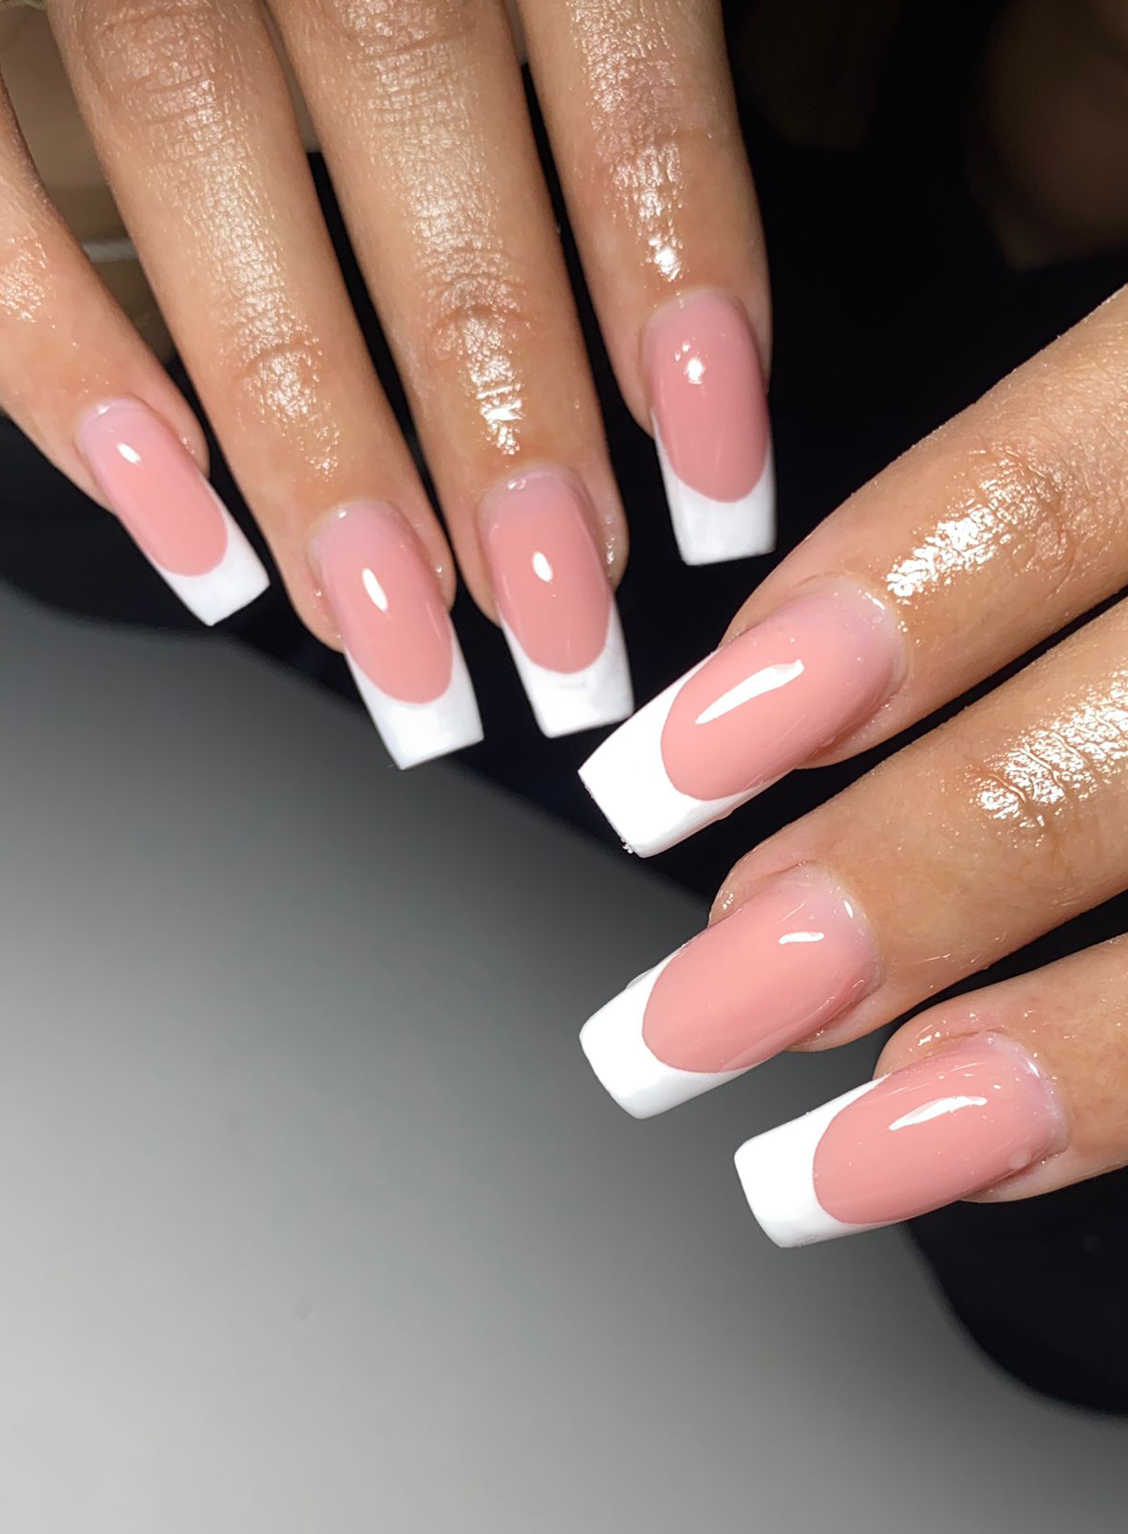 ONGLERIE (NAILS) / 40€ à 65€